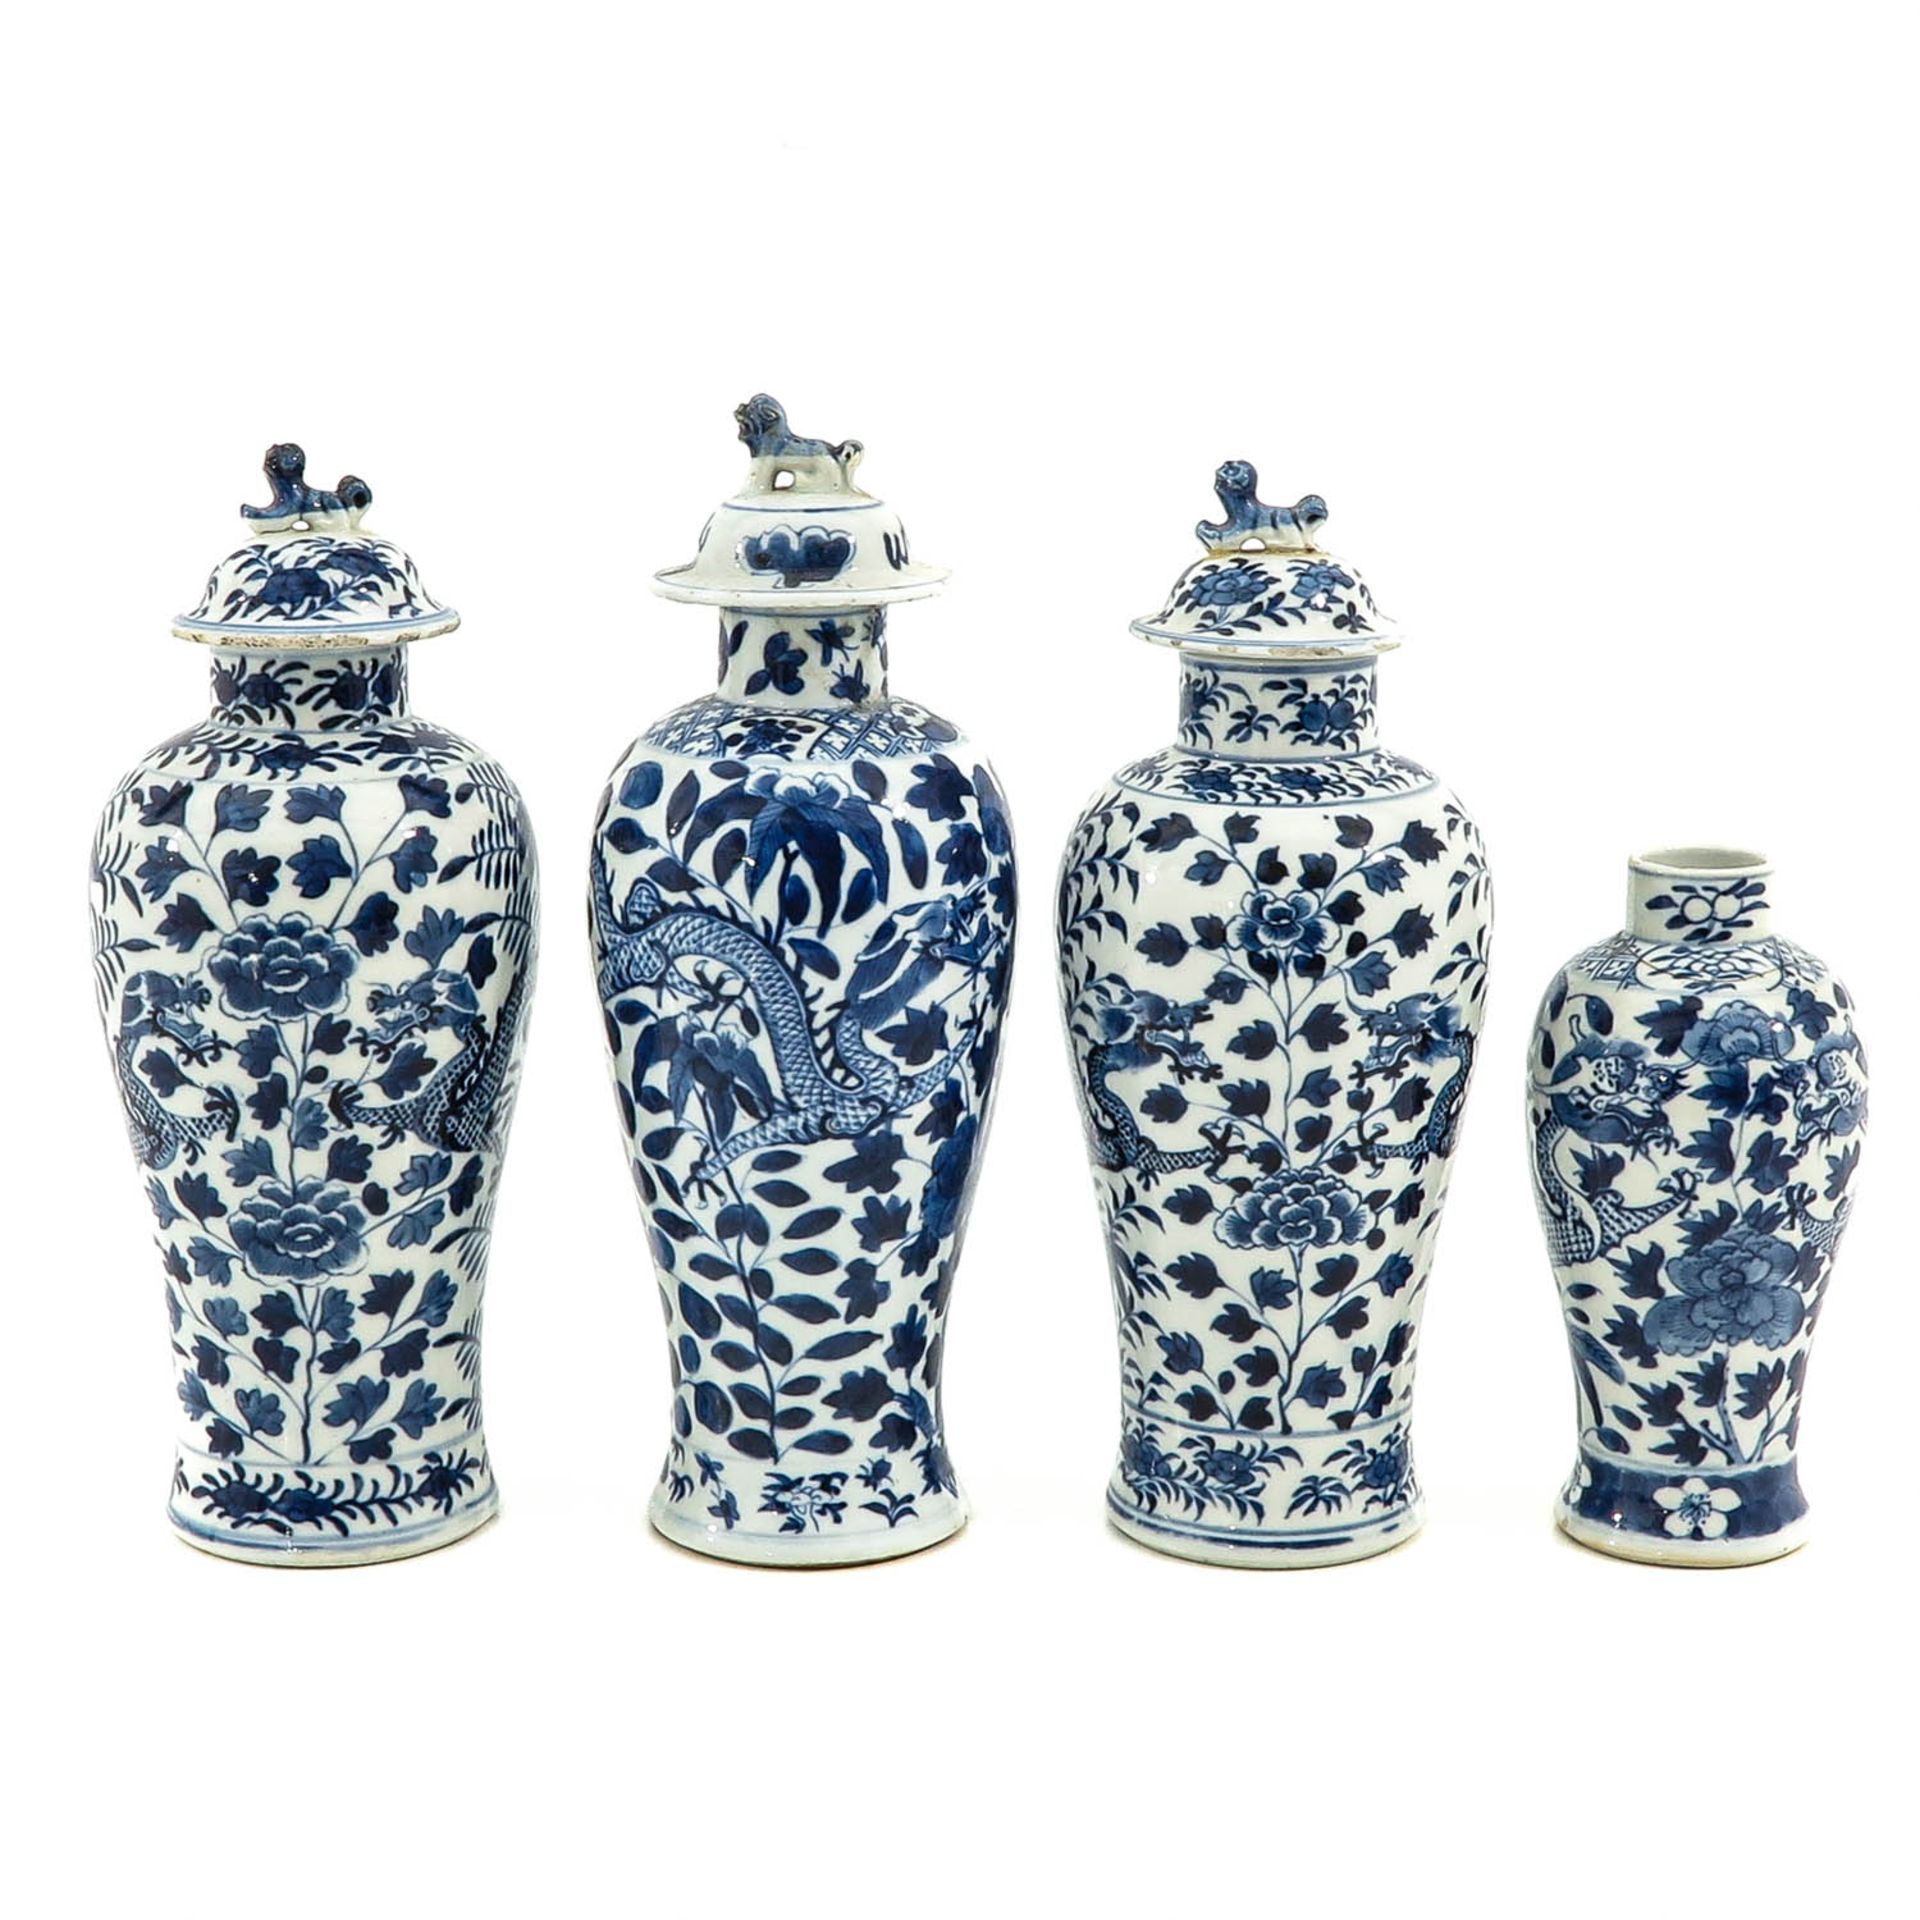 A Collection of 4 Blue and White Vases